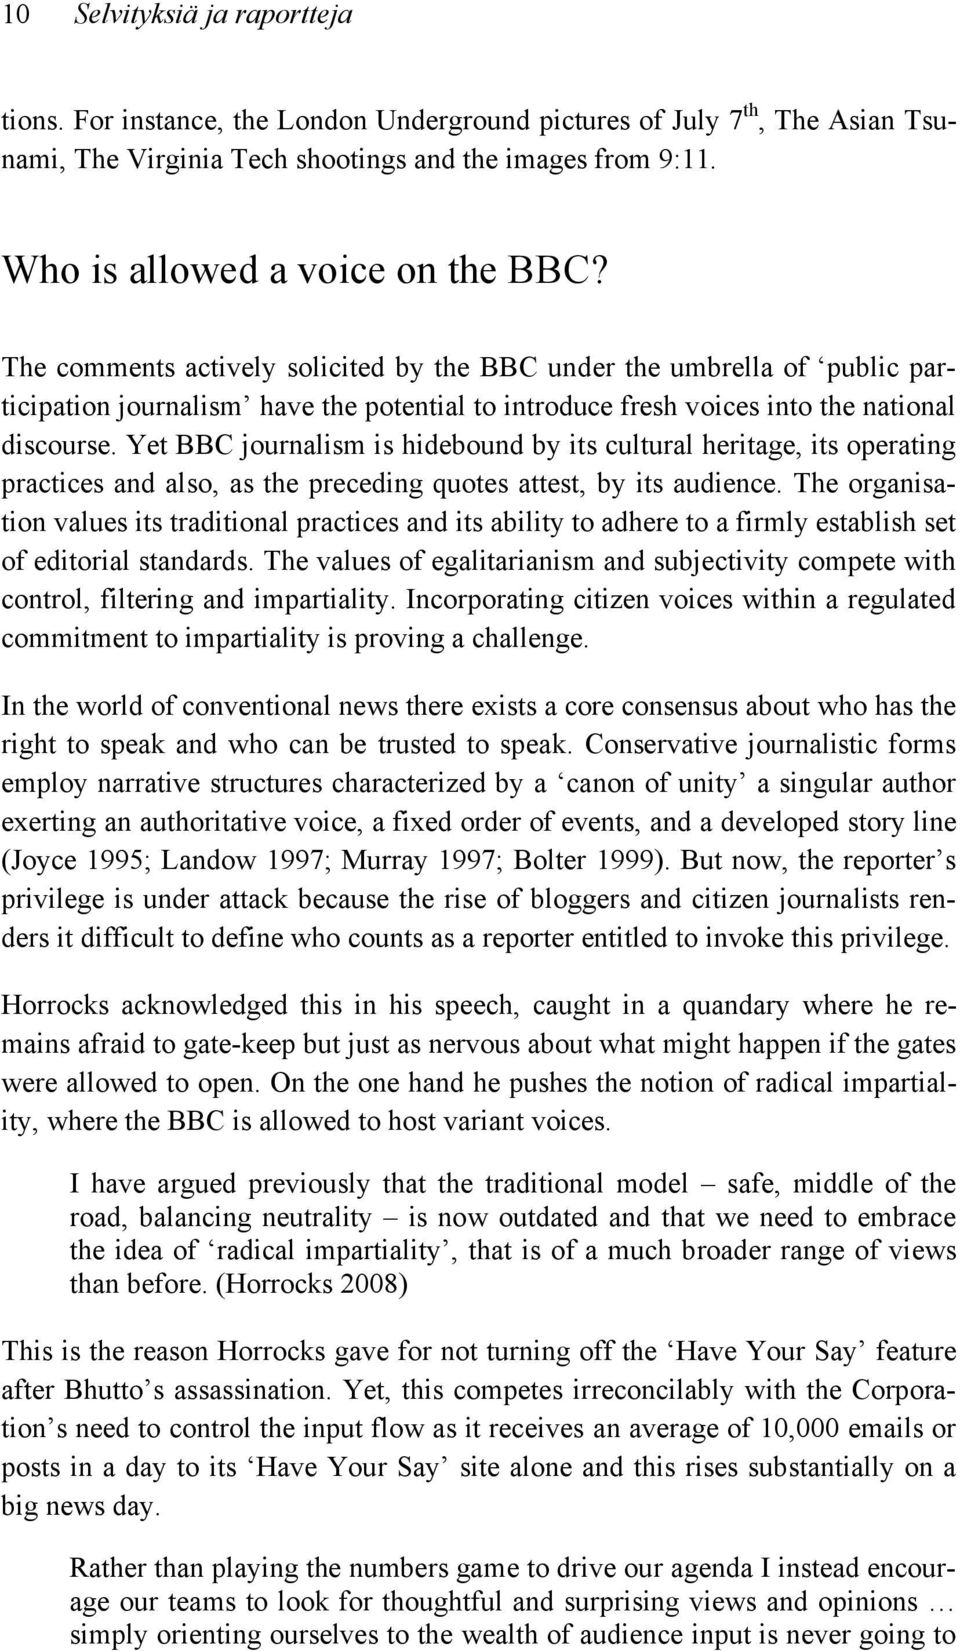 The comments actively solicited by the BBC under the umbrella of public participation journalism have the potential to introduce fresh voices into the national discourse.